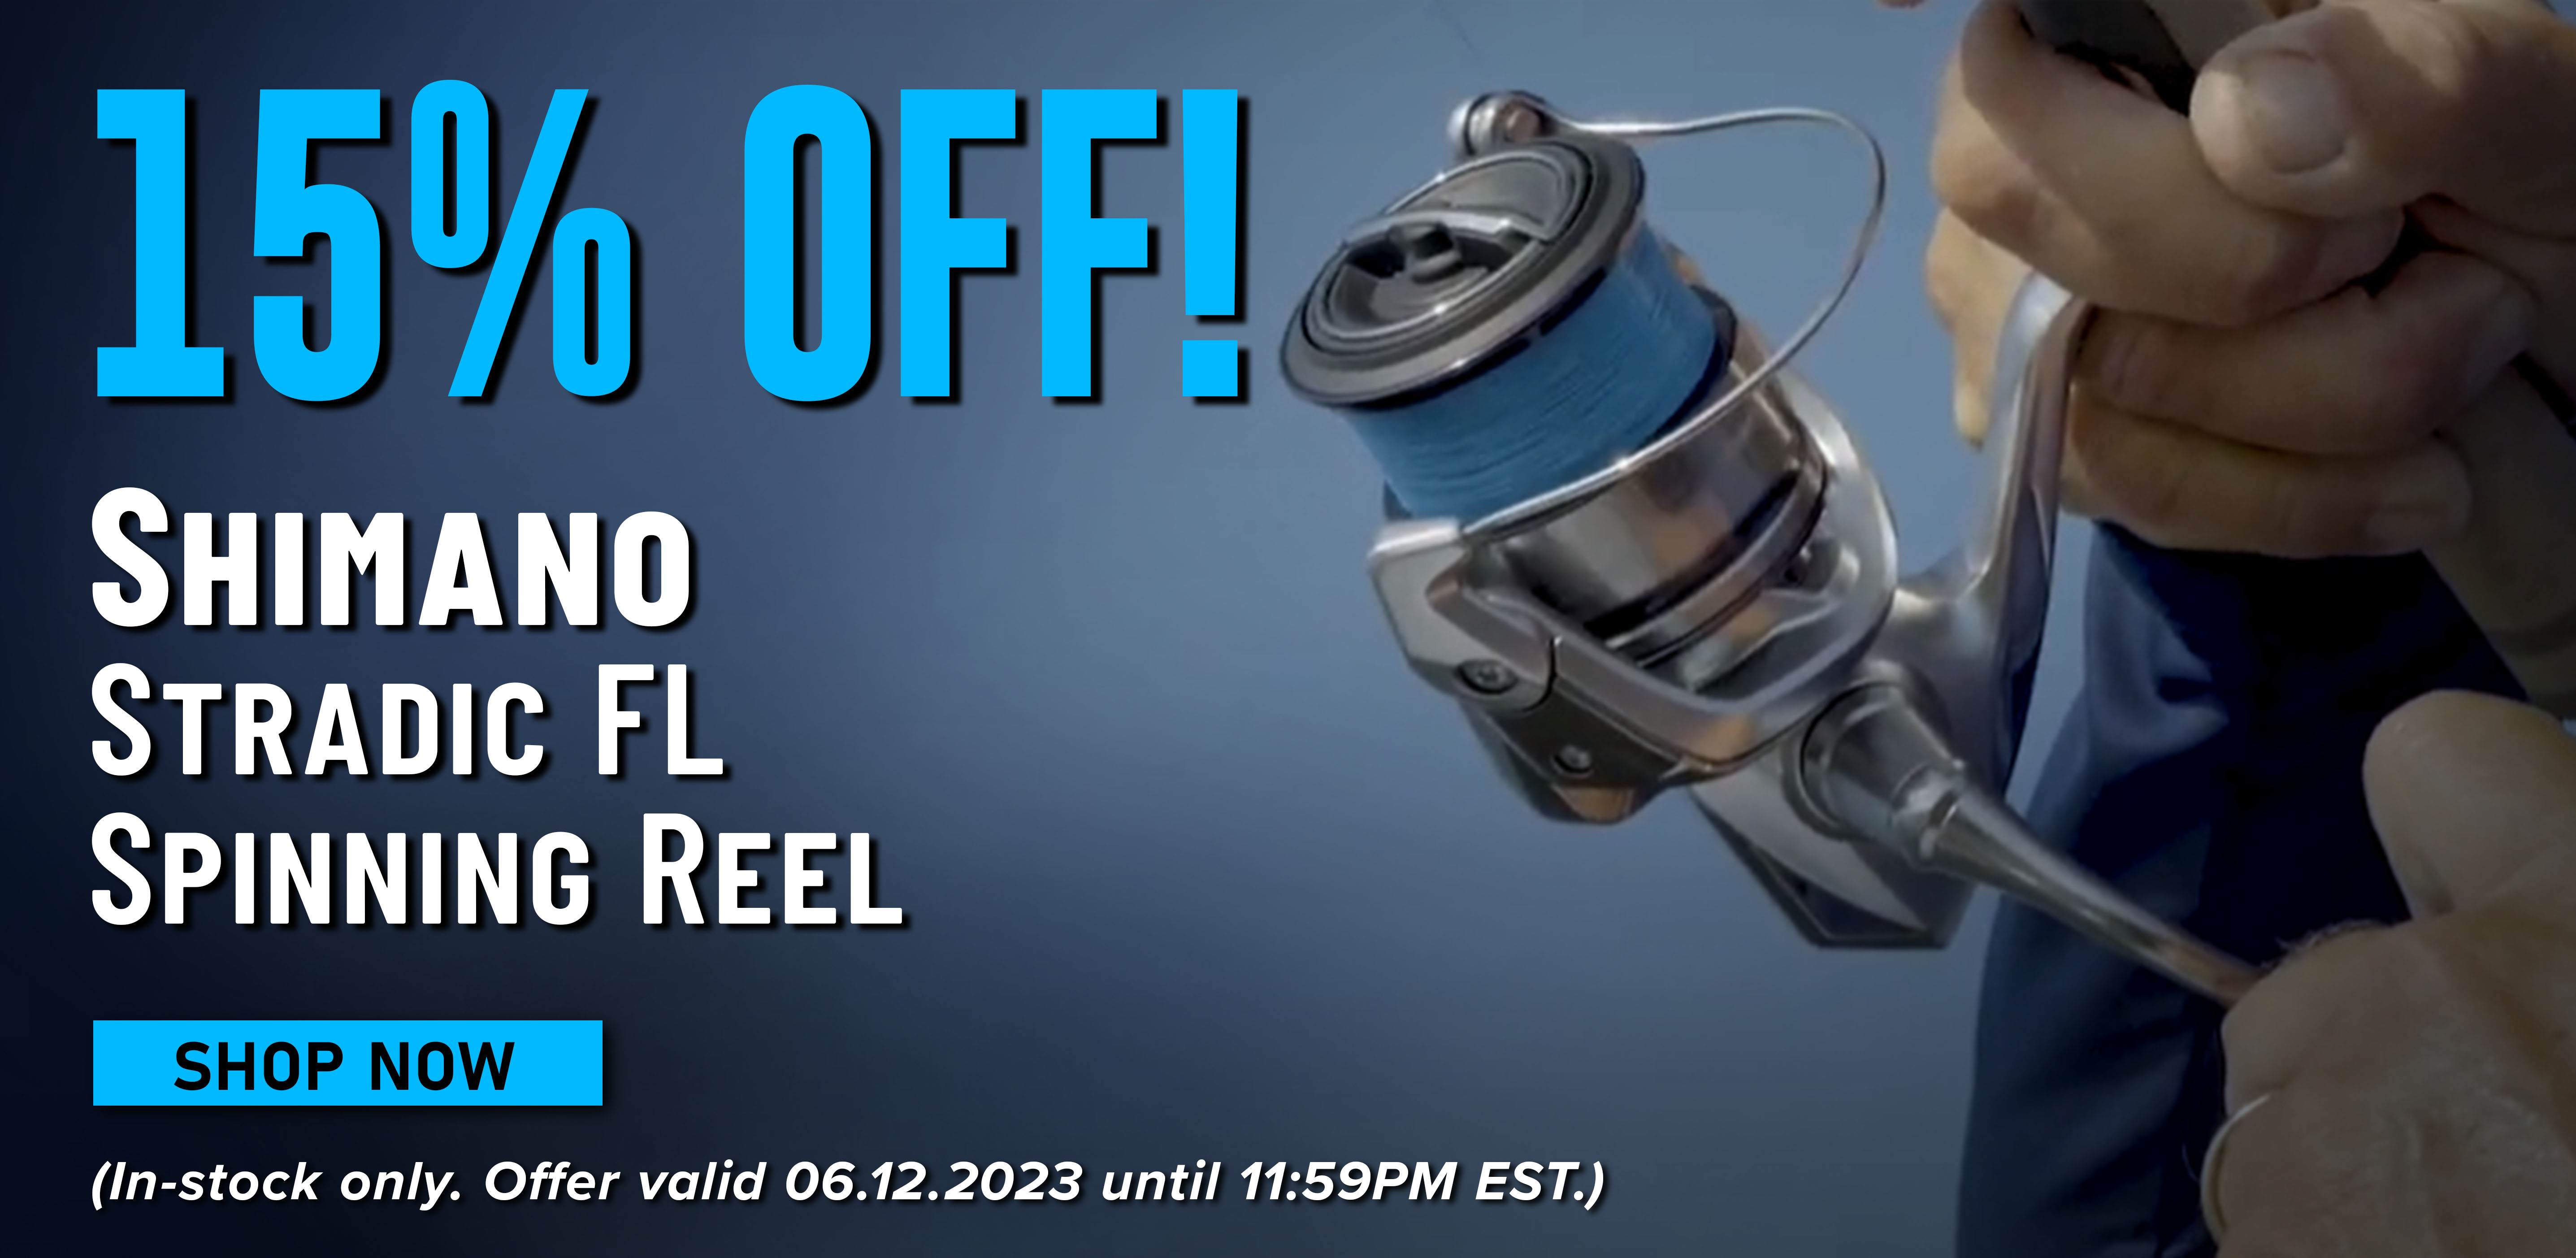 Don't Miss This! Shimano Stradic Spinning Reels 15% Off! - Fish USA